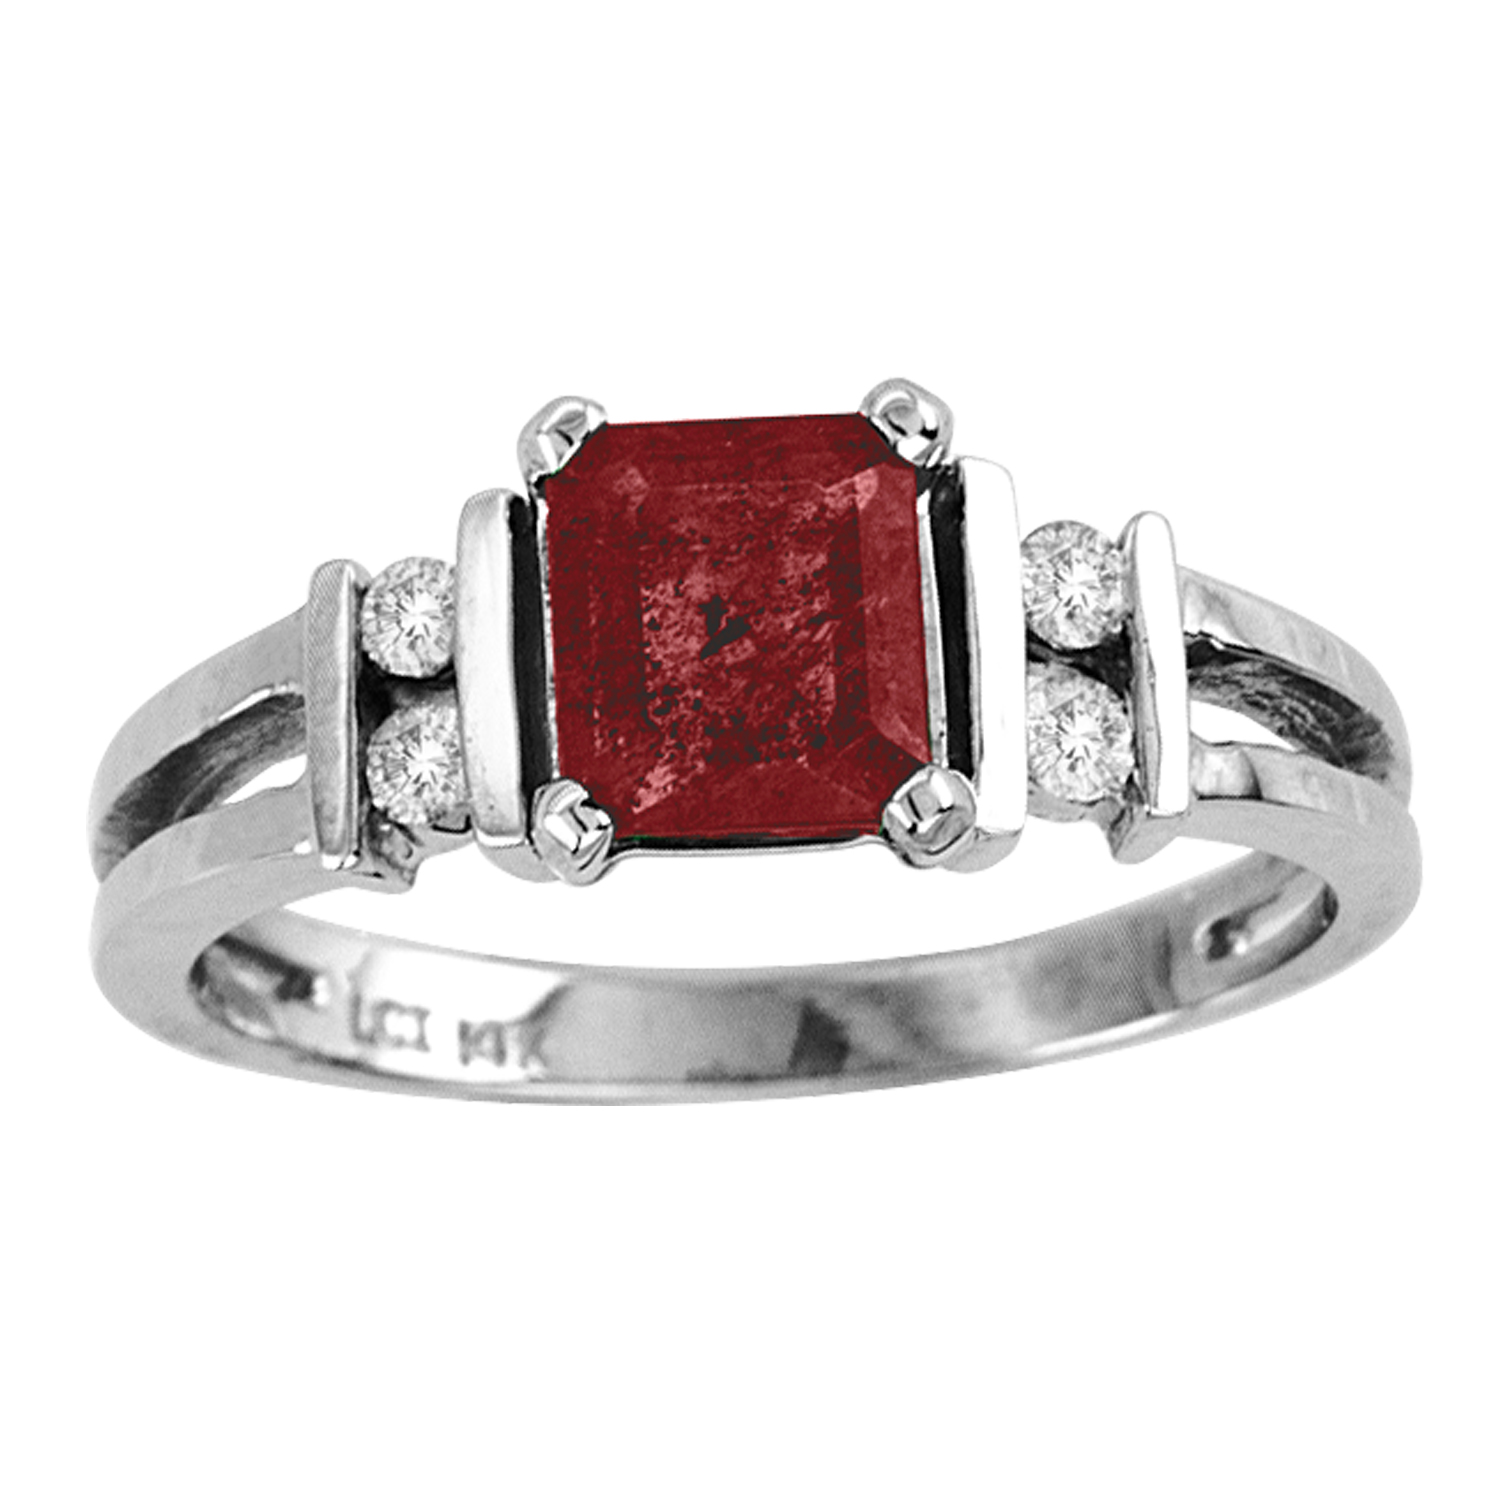 View 1.10cttw Diamond and Natural Heated Ruby Ring set in 14k Gold 